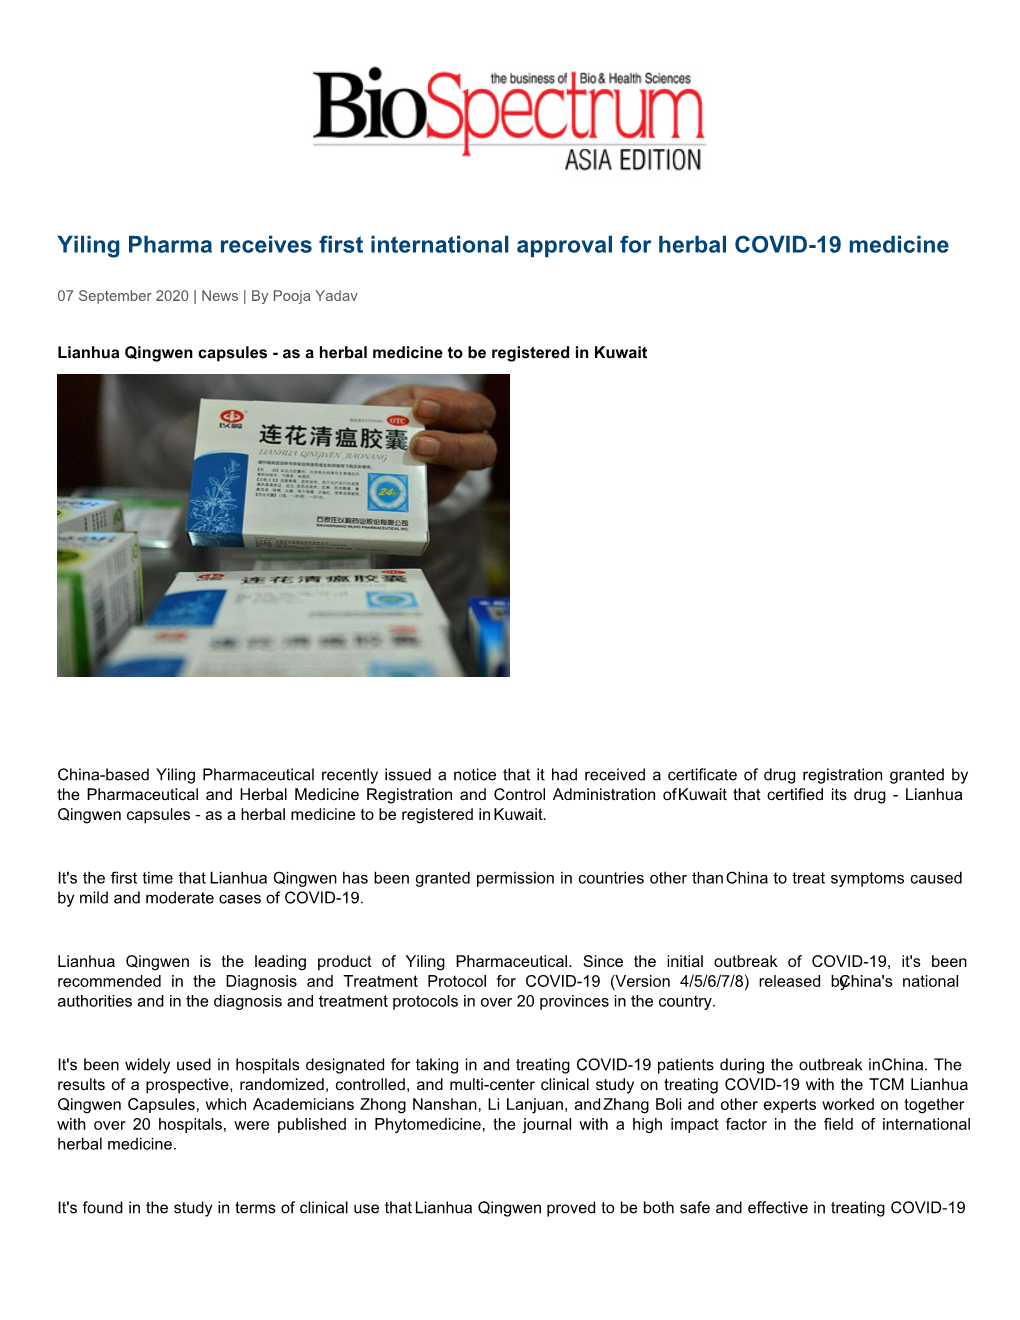 Yiling Pharma Receives First International Approval for Herbal COVID-19 Medicine